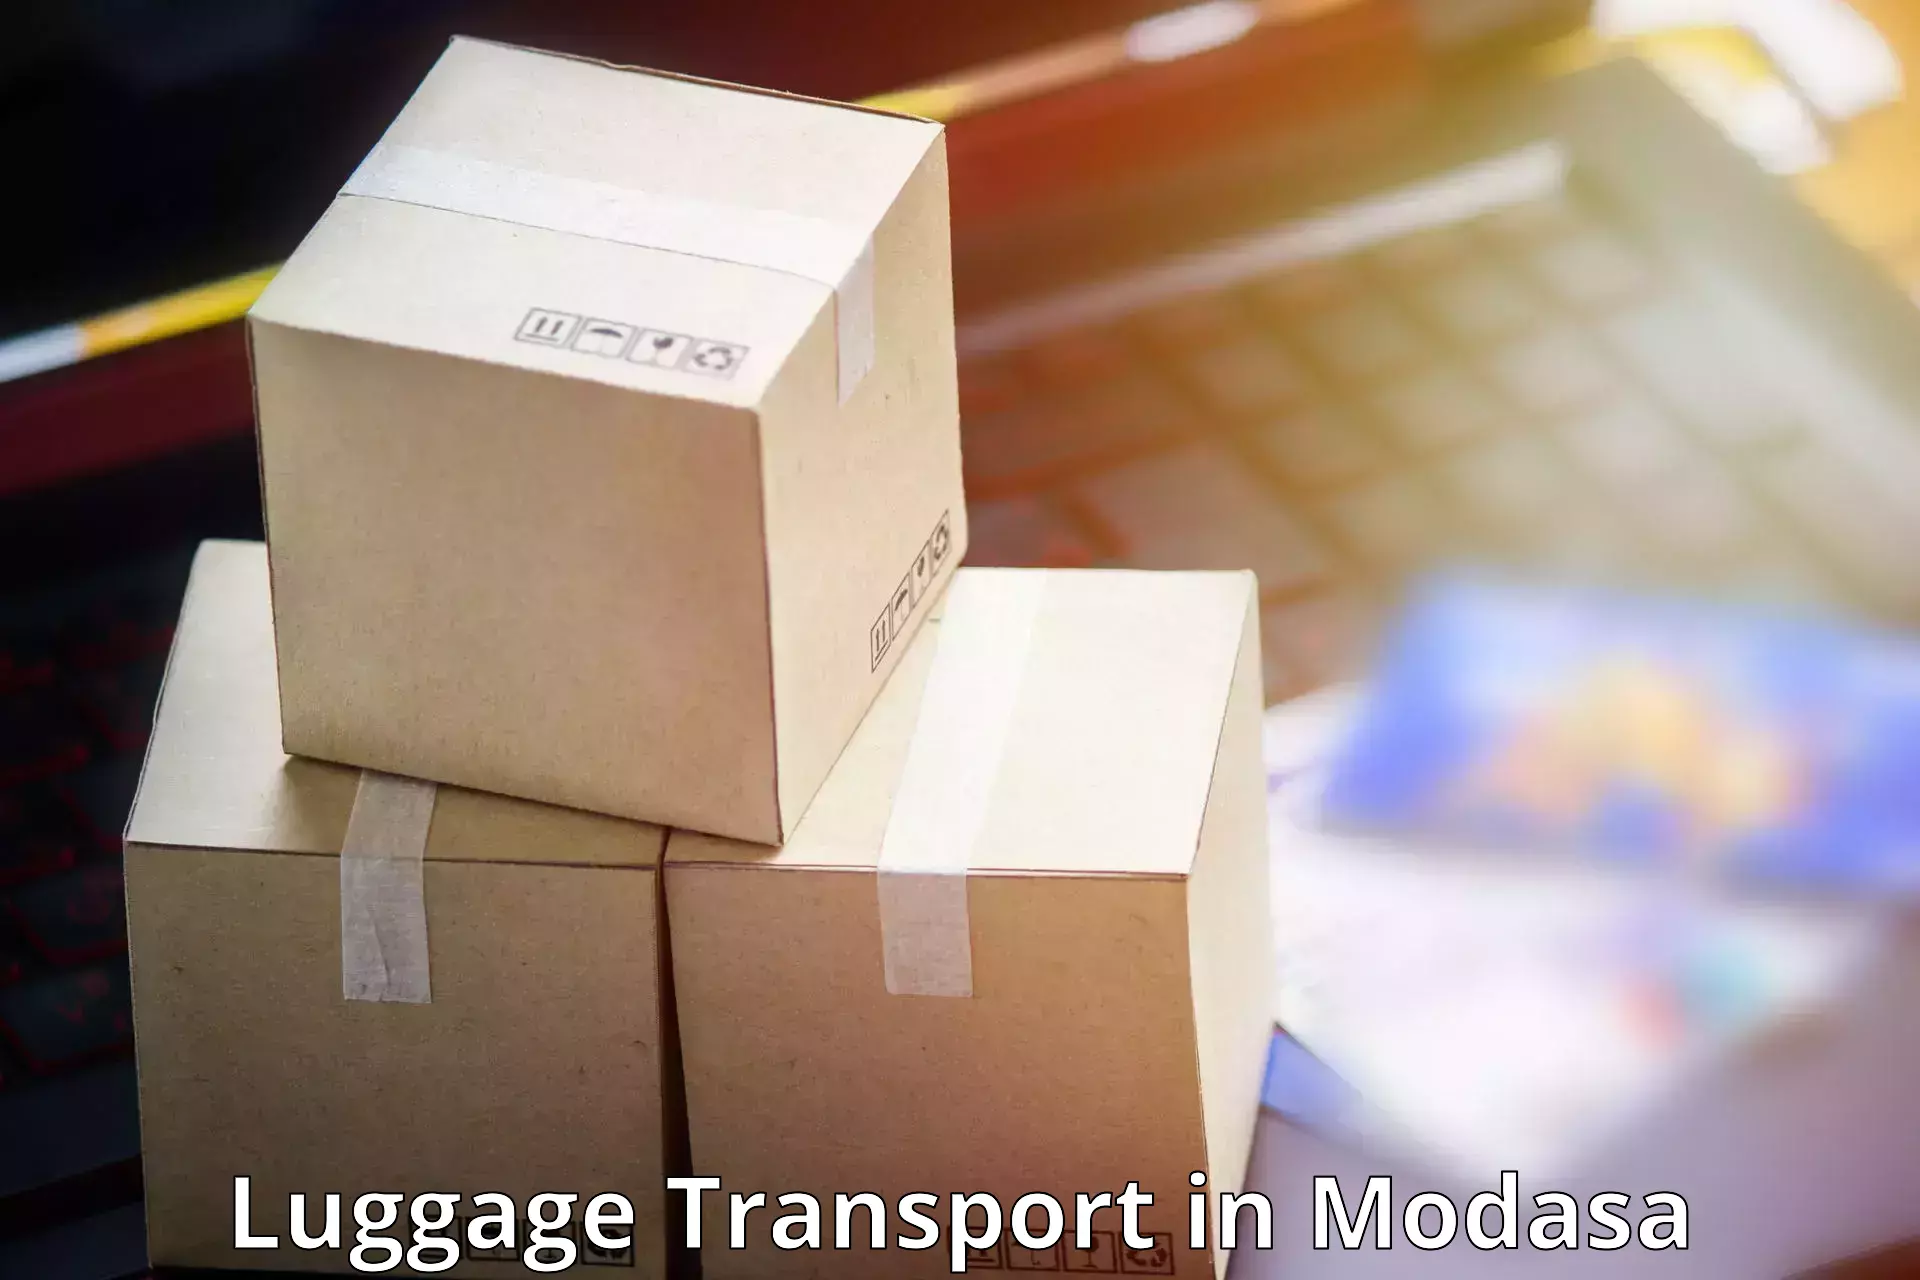 Luggage shipping management in Modasa